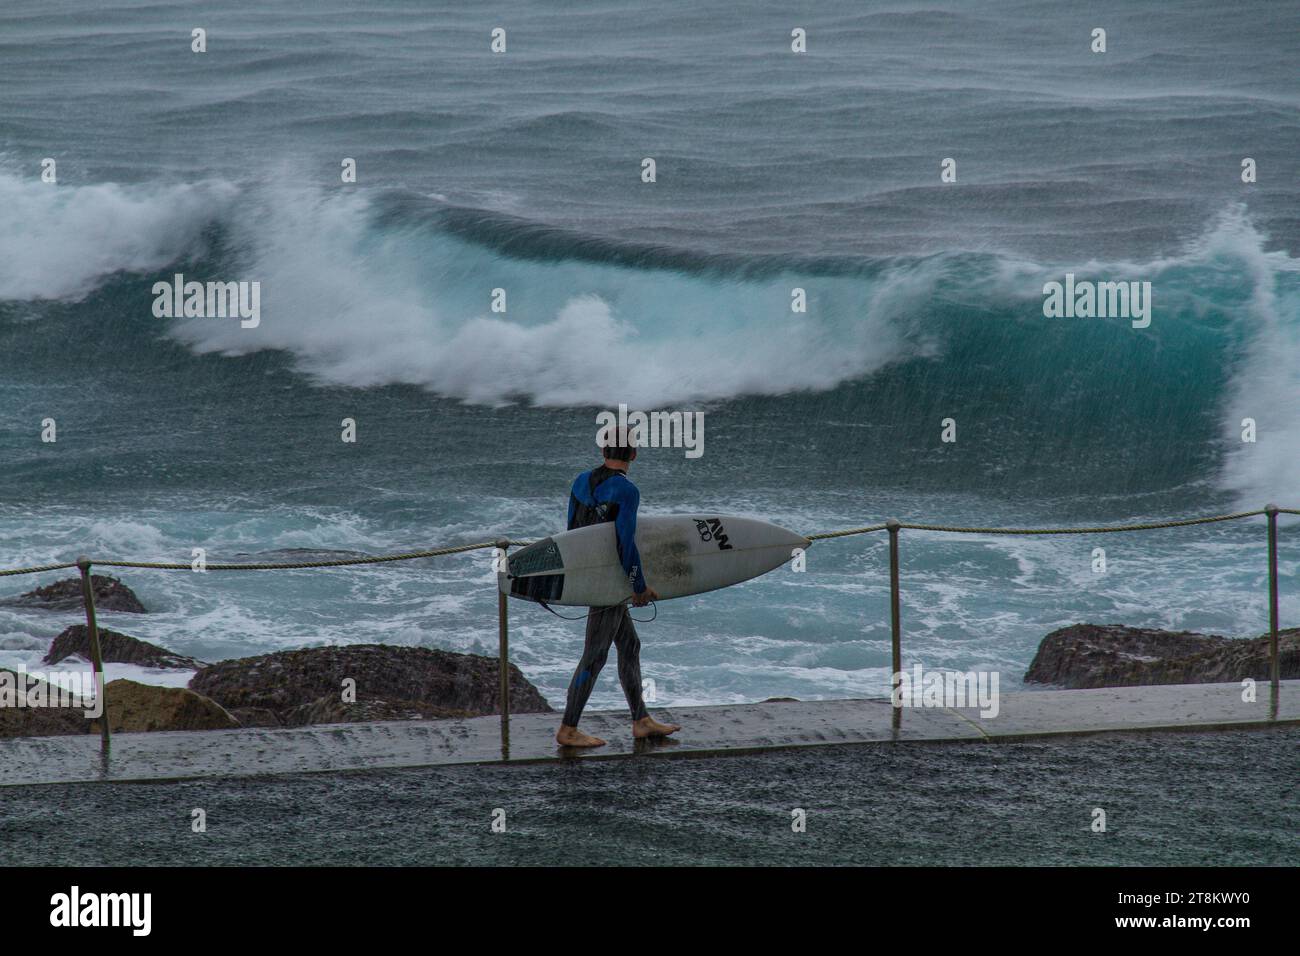 A young surfer walks on the edge of Bronte ocean pool contemplating entering the water during a storm. Stock Photo